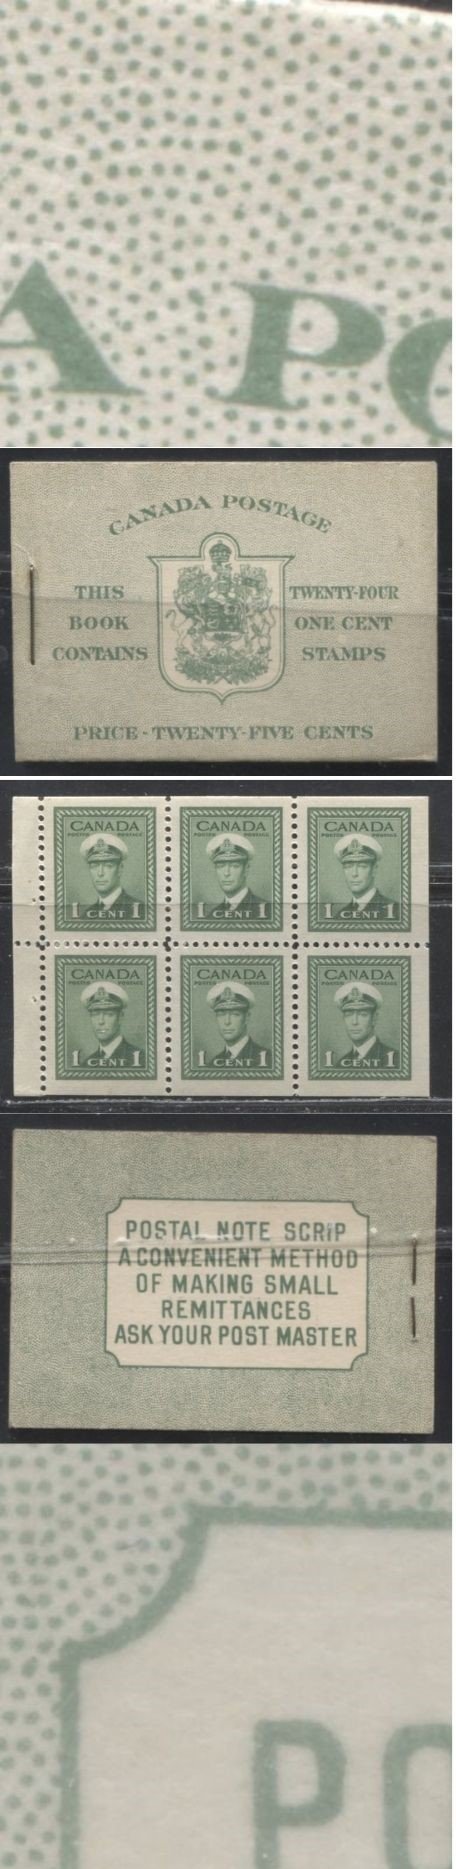 Lot 99 Canada #BK32f 1942-1949 War Issue, Complete 25¢ English Booklet, 4 Panes of 1c Green,  Vertical Wove Paper, Harris Front Cover Type IIa, Back Cover Type Cbi, 7c & 6c Airmail Rates Page